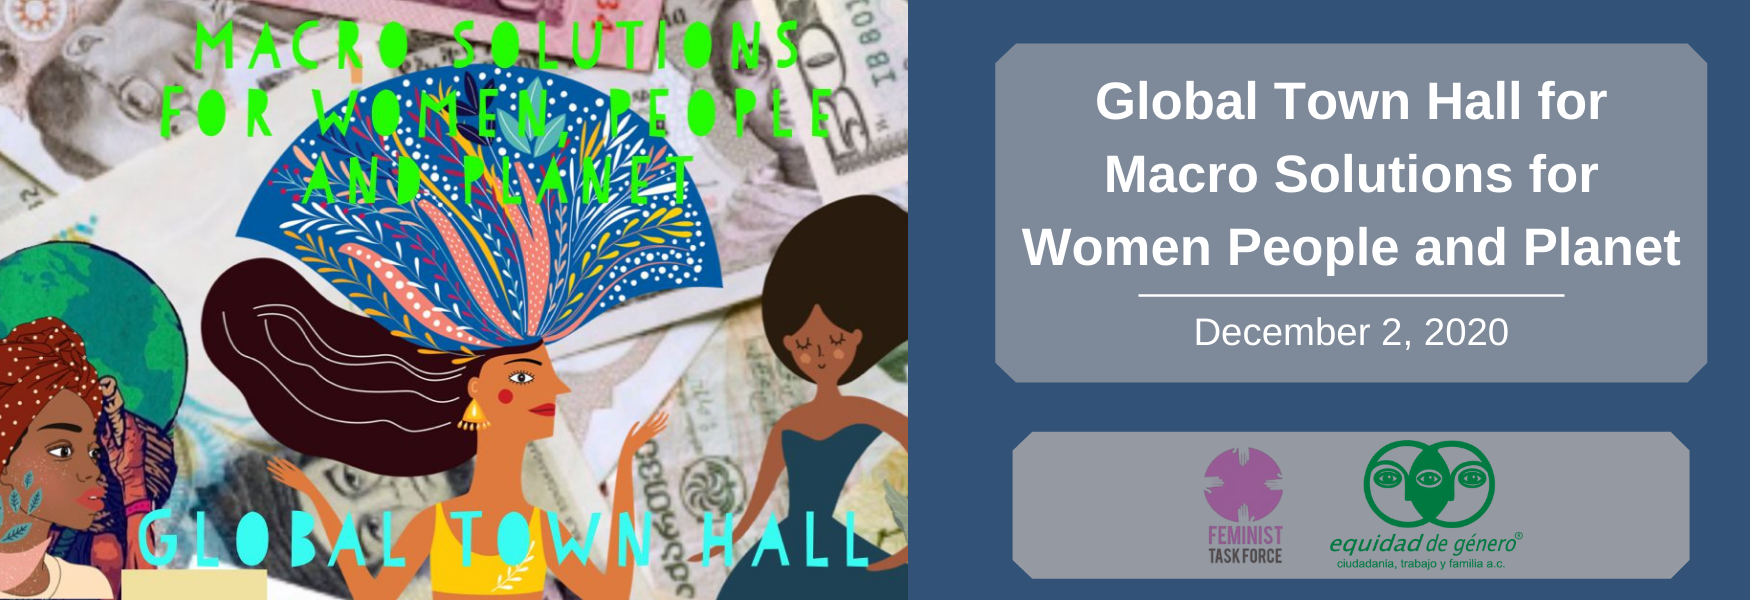 Global Town Hall for Macro Solutions for Women, People and the Planet